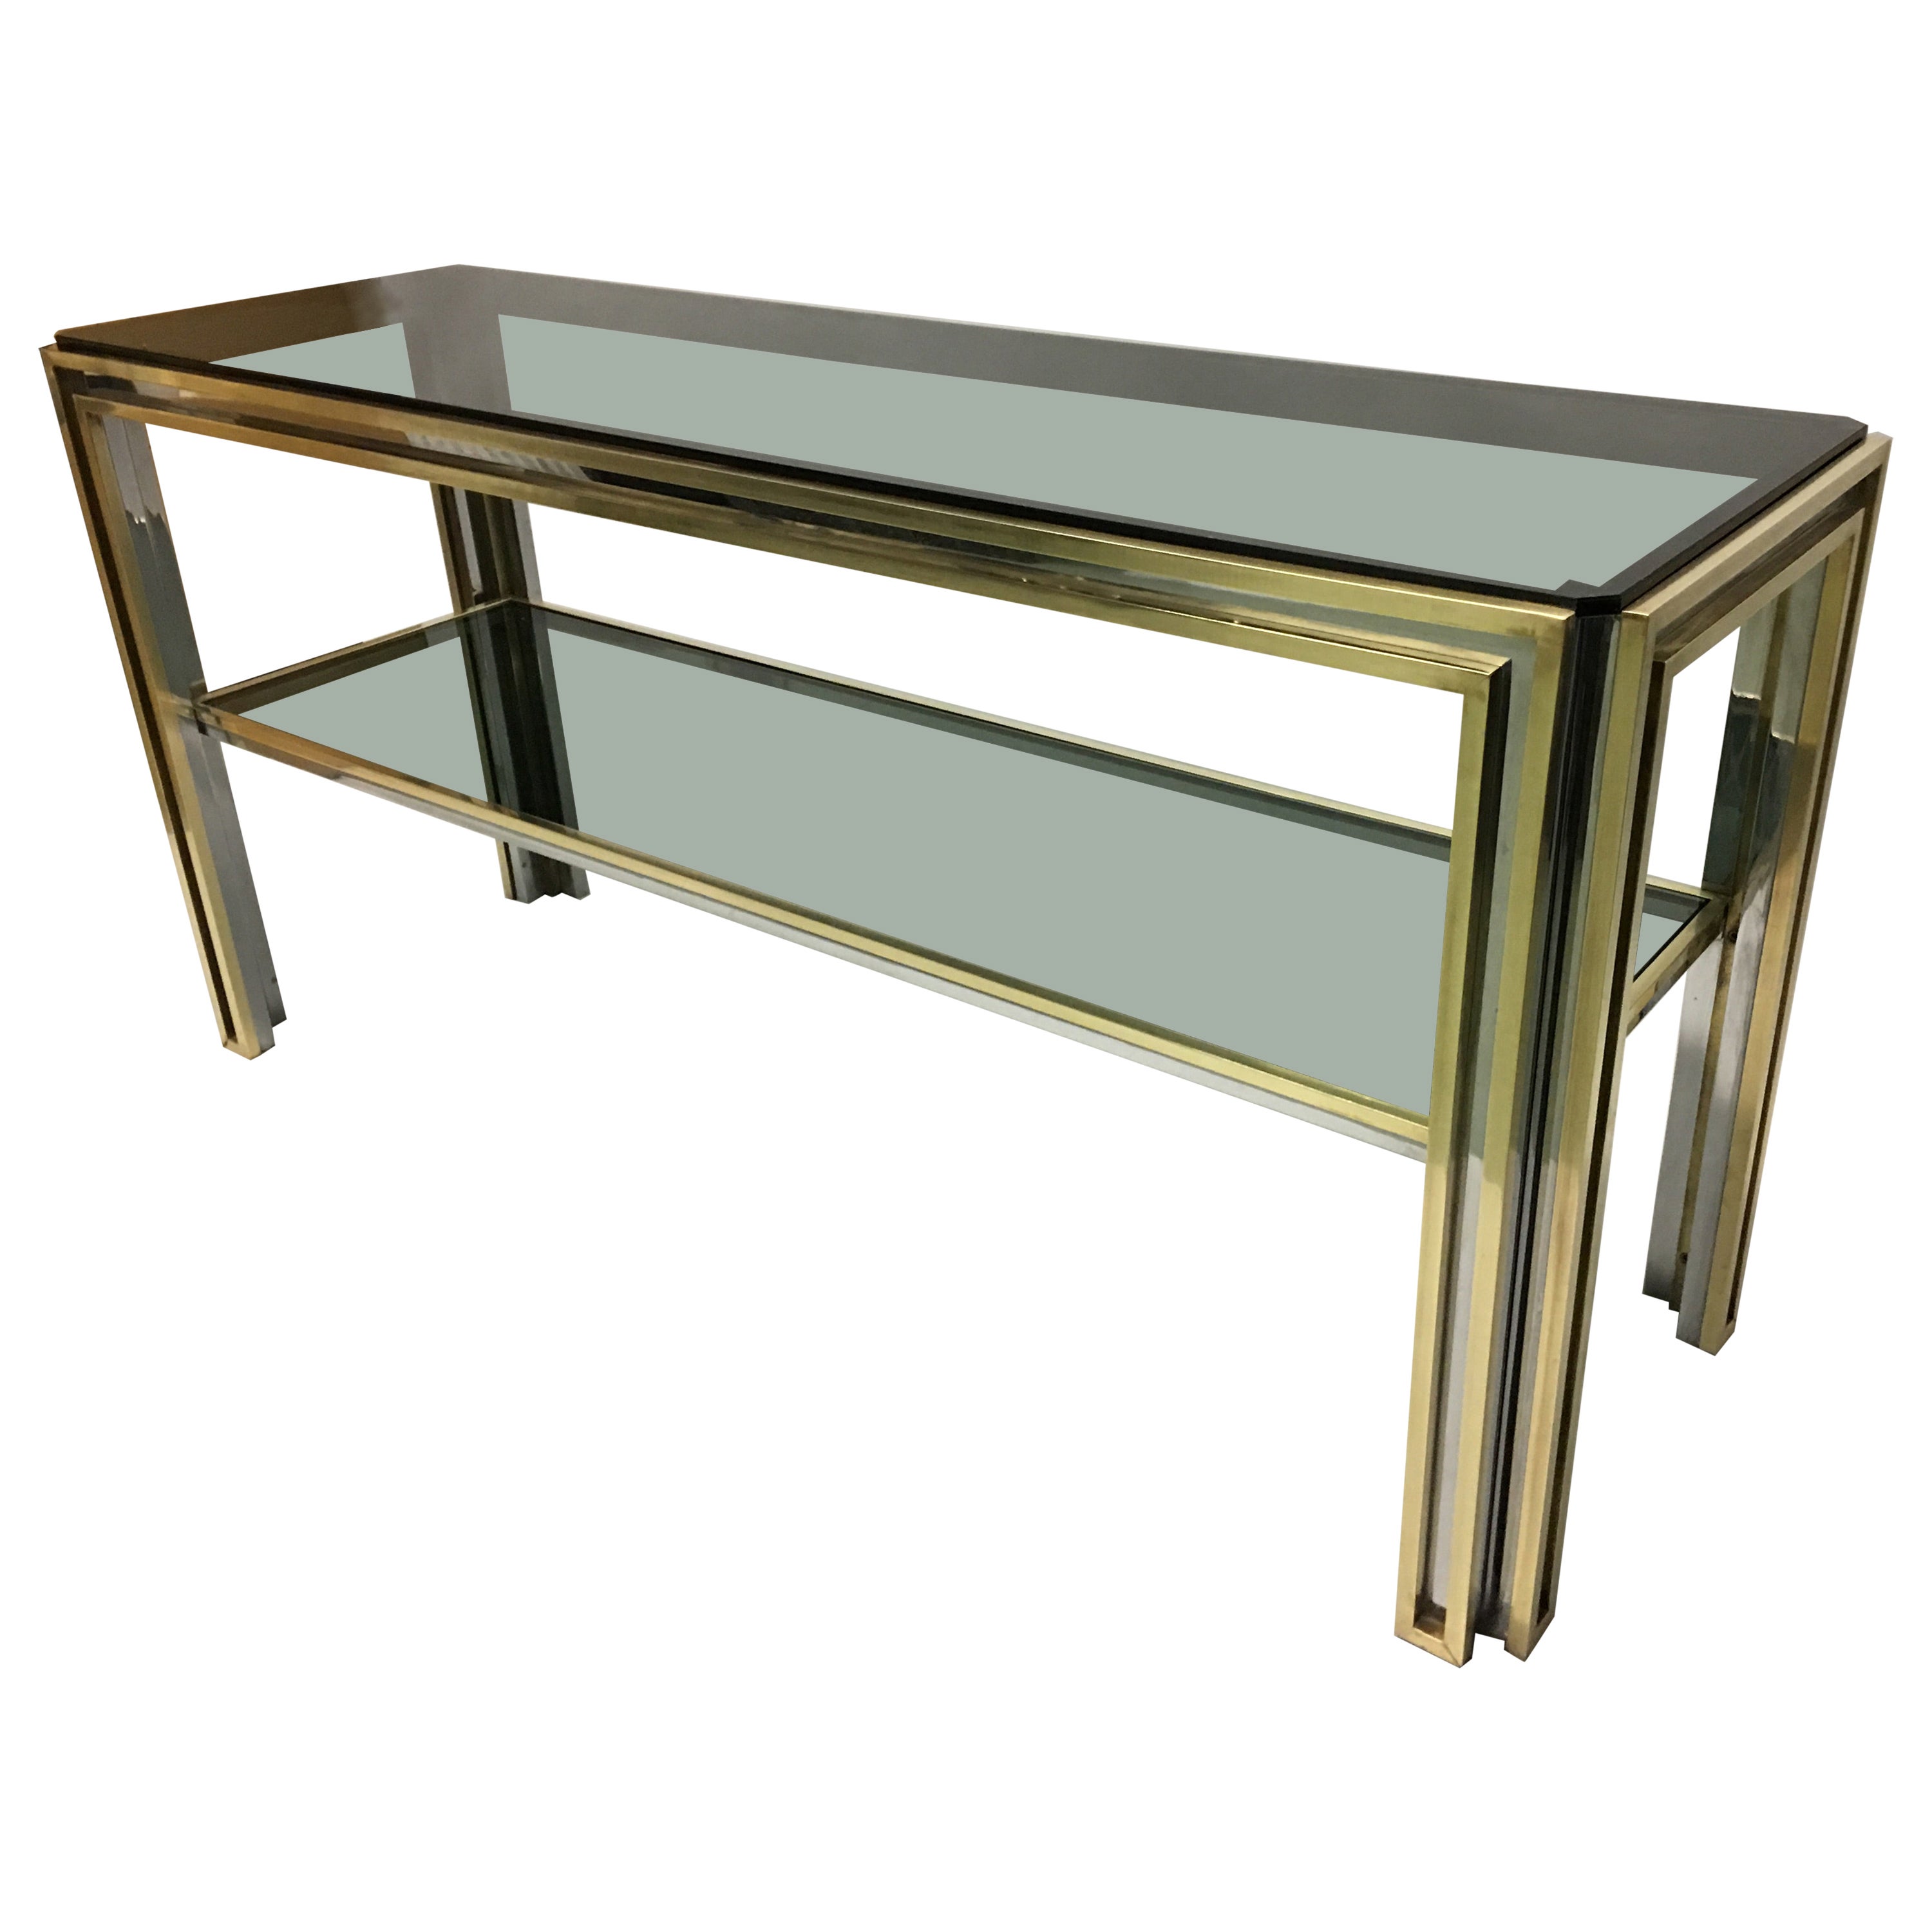 Italian Mid-Century Modern Brass and Chrome Console / Sofa Table by Willy Rizzo